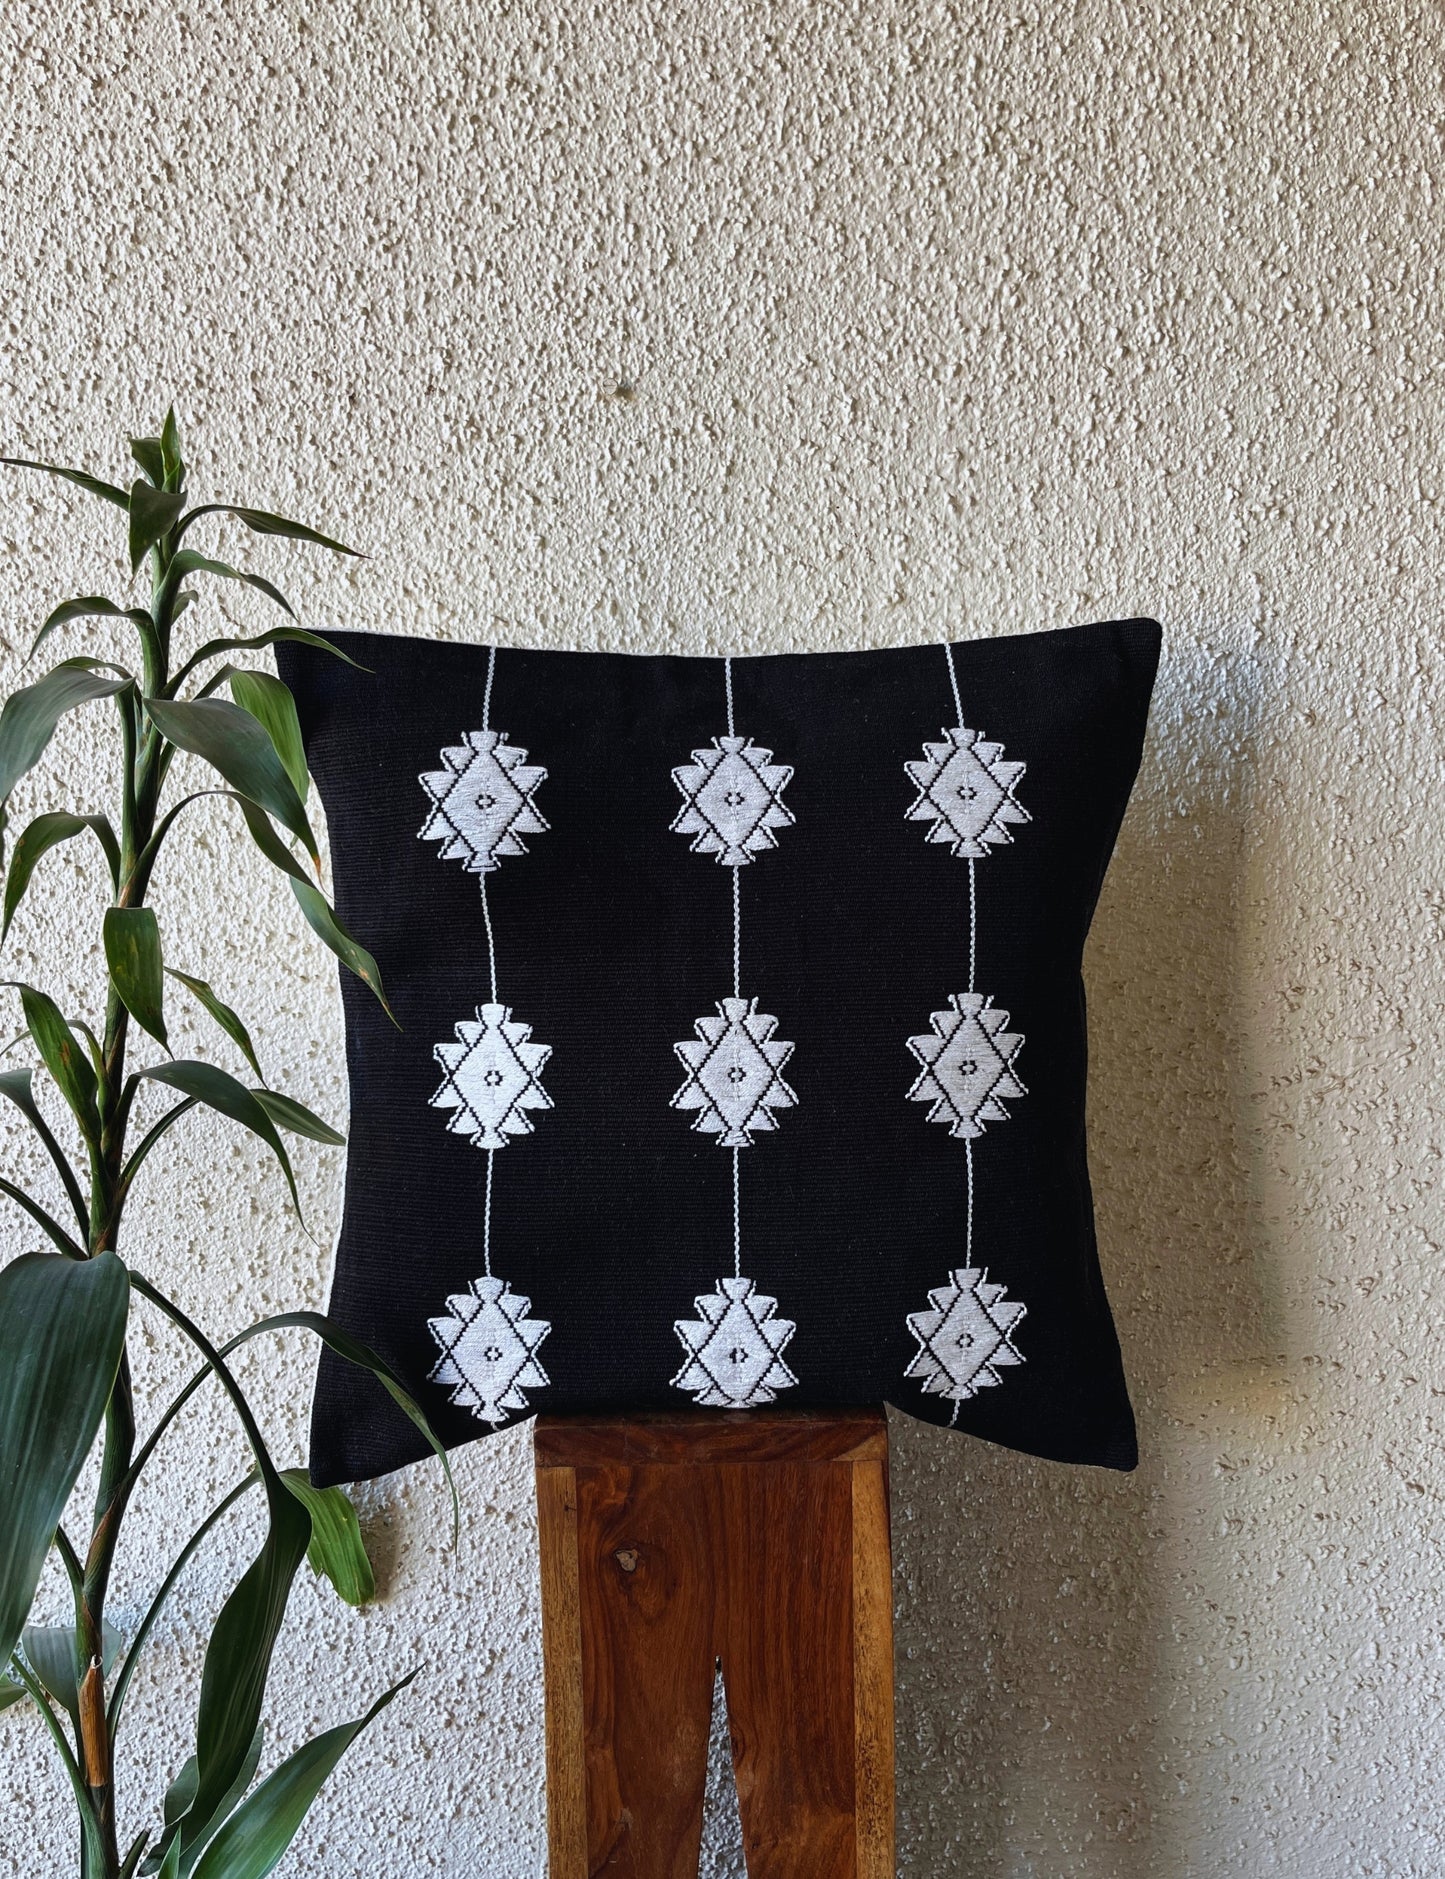 Chizami Weaves - Loin Loom Handwoven Cushion Cover Set in White & Black (Set of 5)